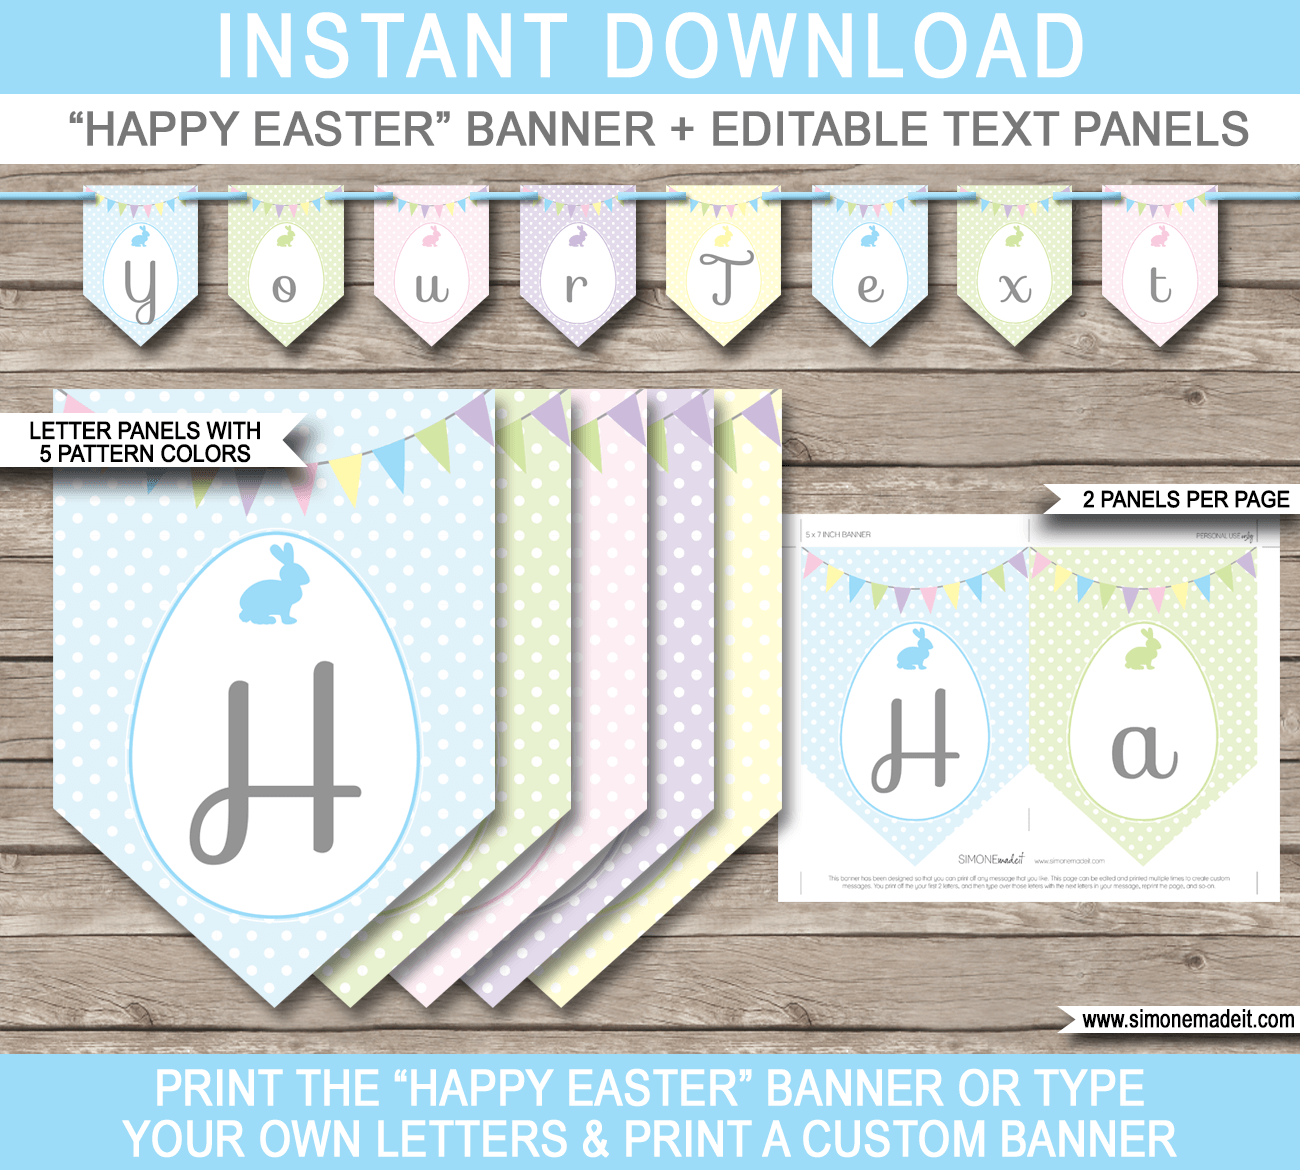 Printable Easter Pennant Banner Template - Easter Bunting - Happy Easter Banner - DIY Editable Text - INSTANT DOWNLOAD $4.50 via simonemadeit.com